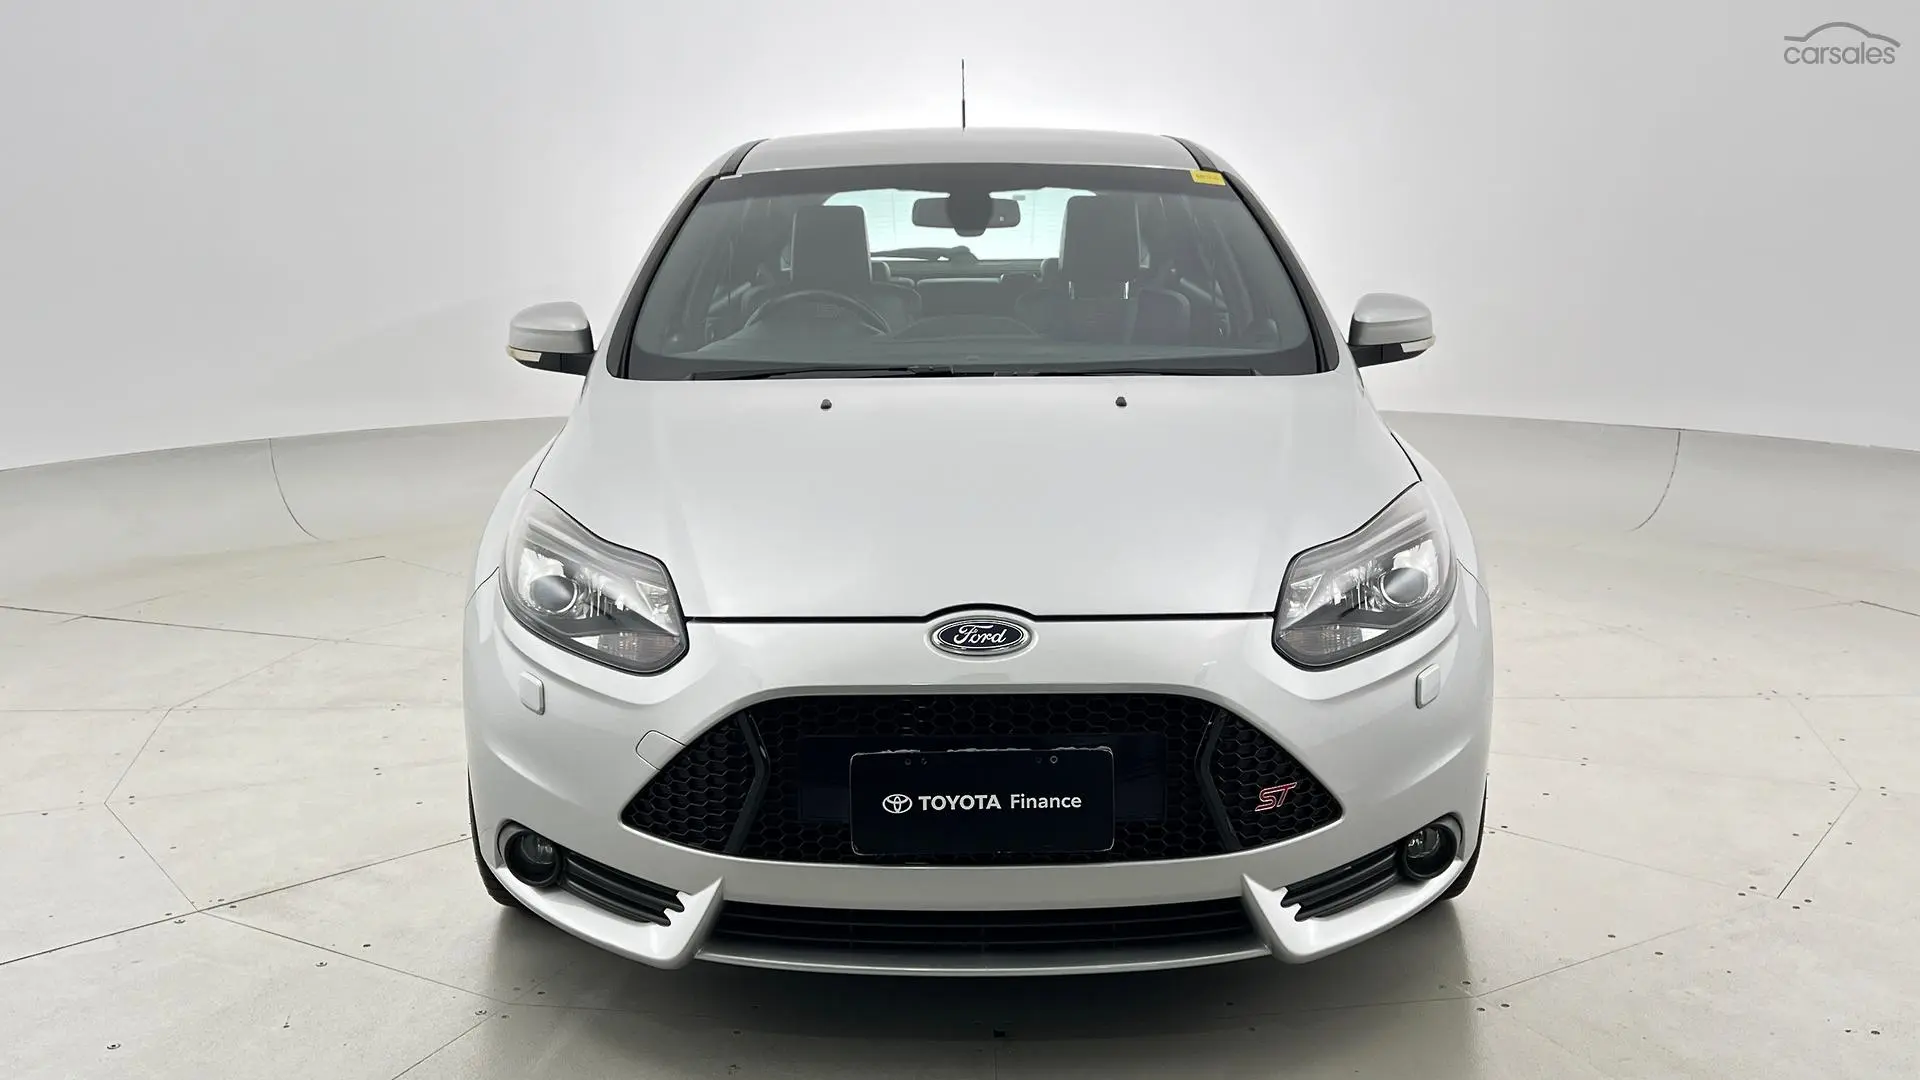 2013 Ford Focus Image 10